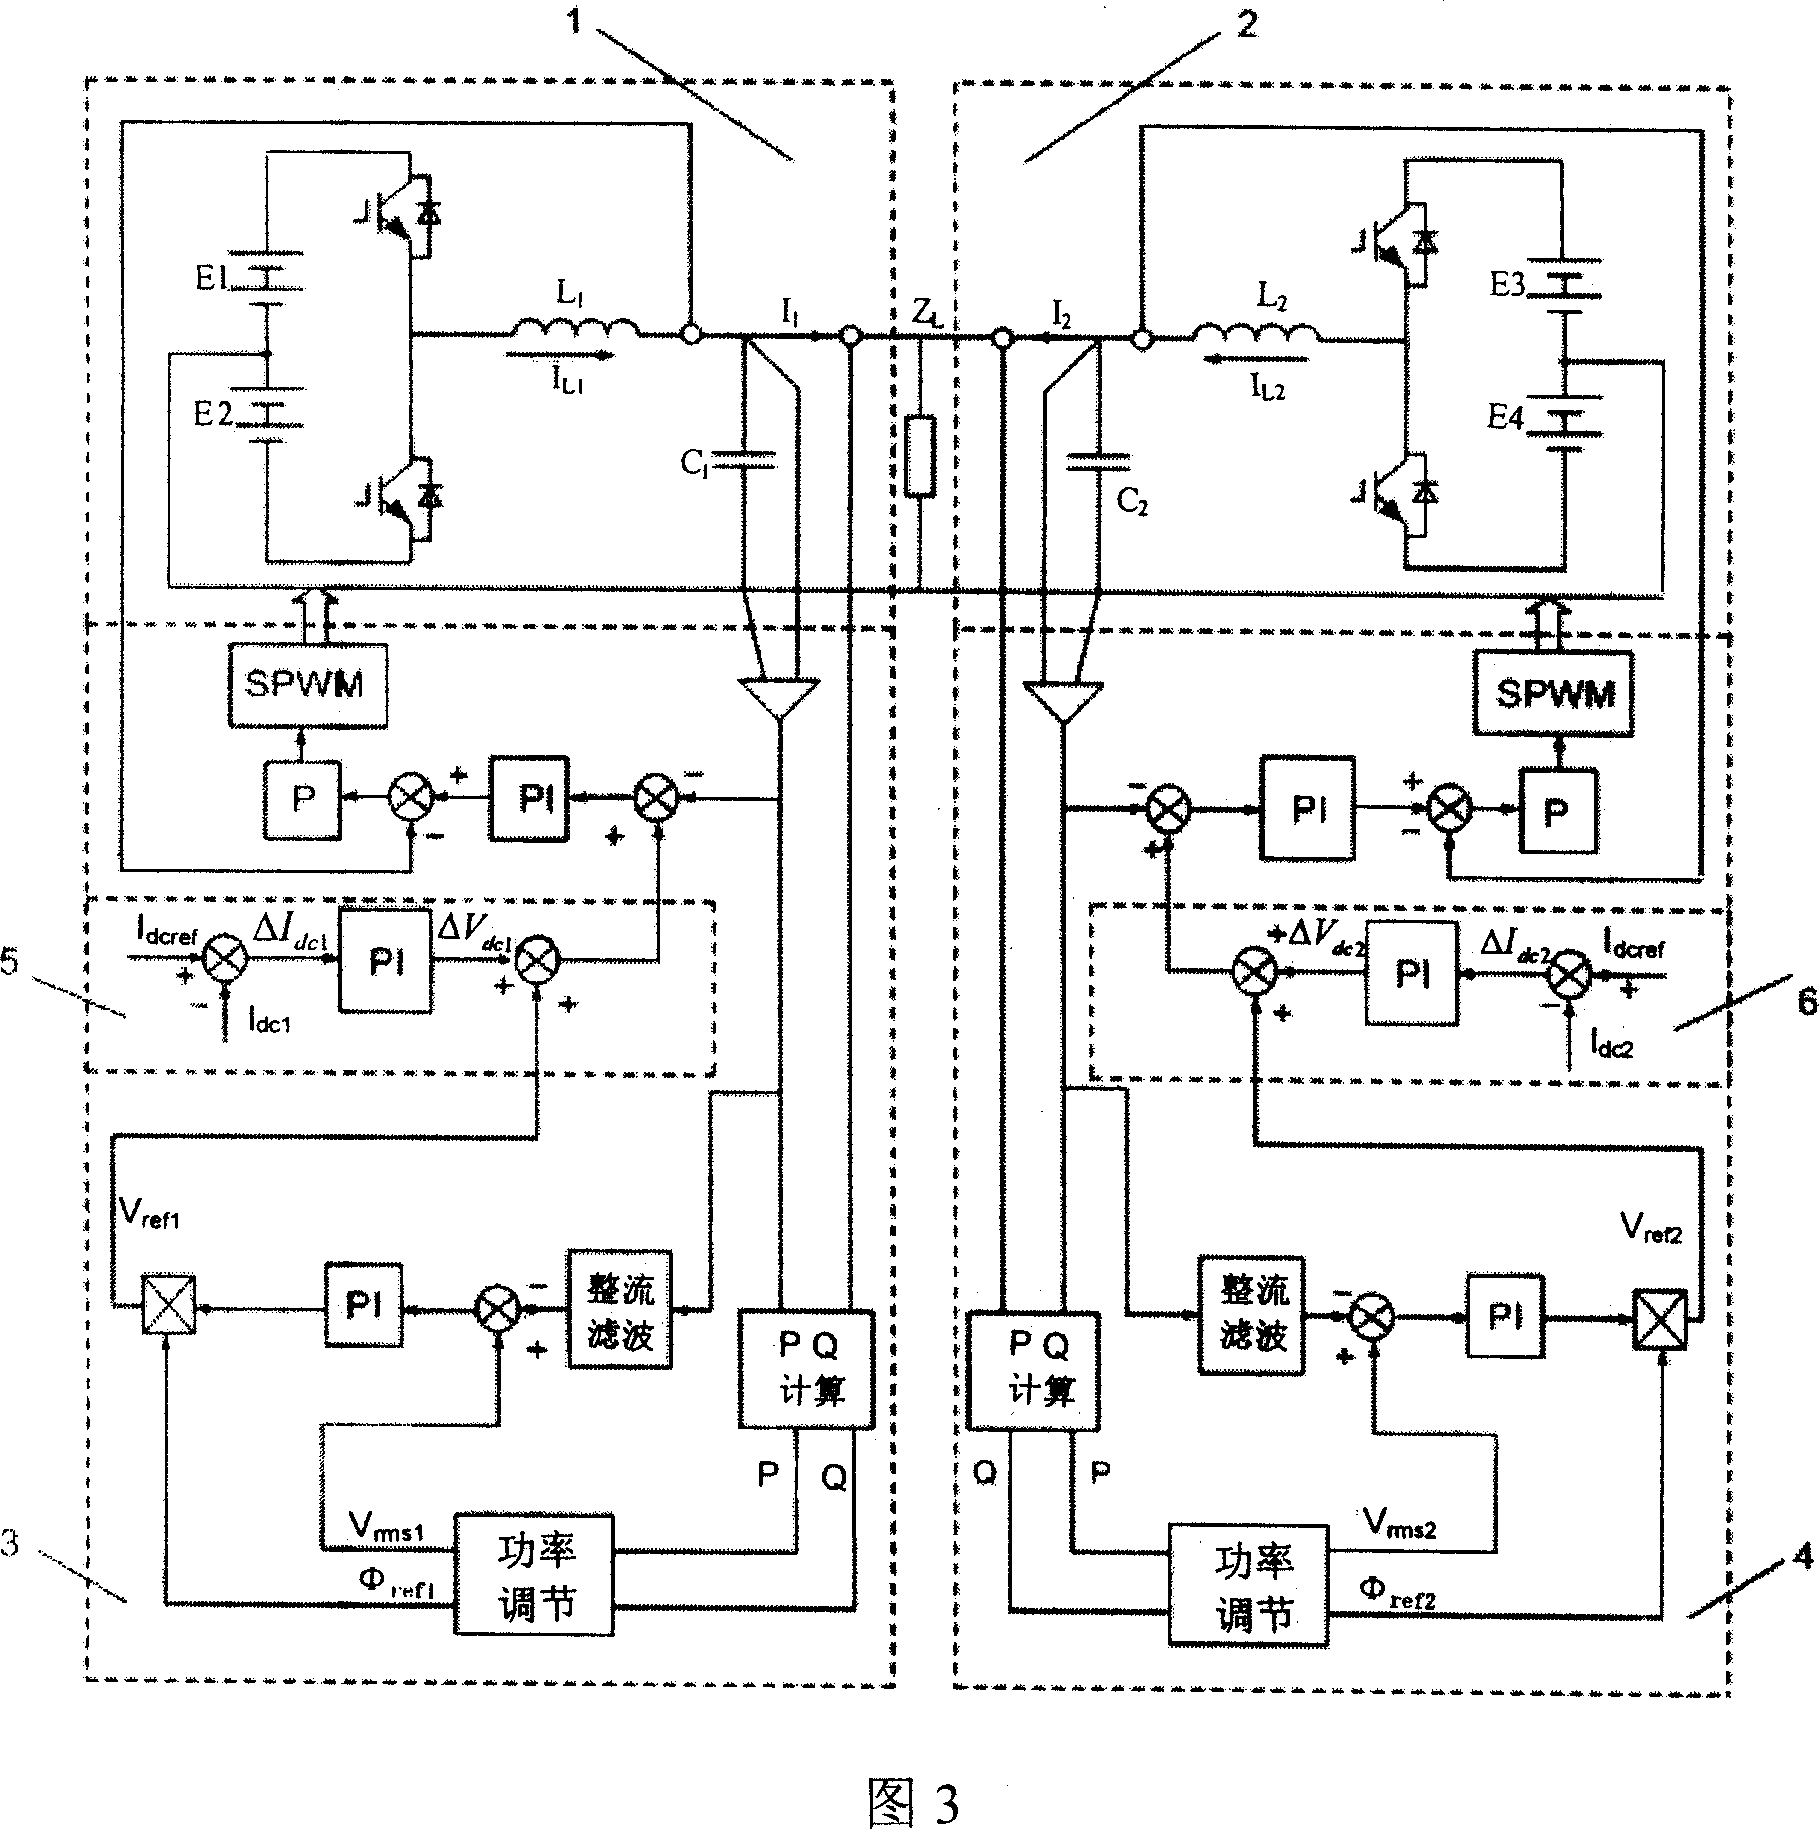 An improved control method for UPS parallel connection average current